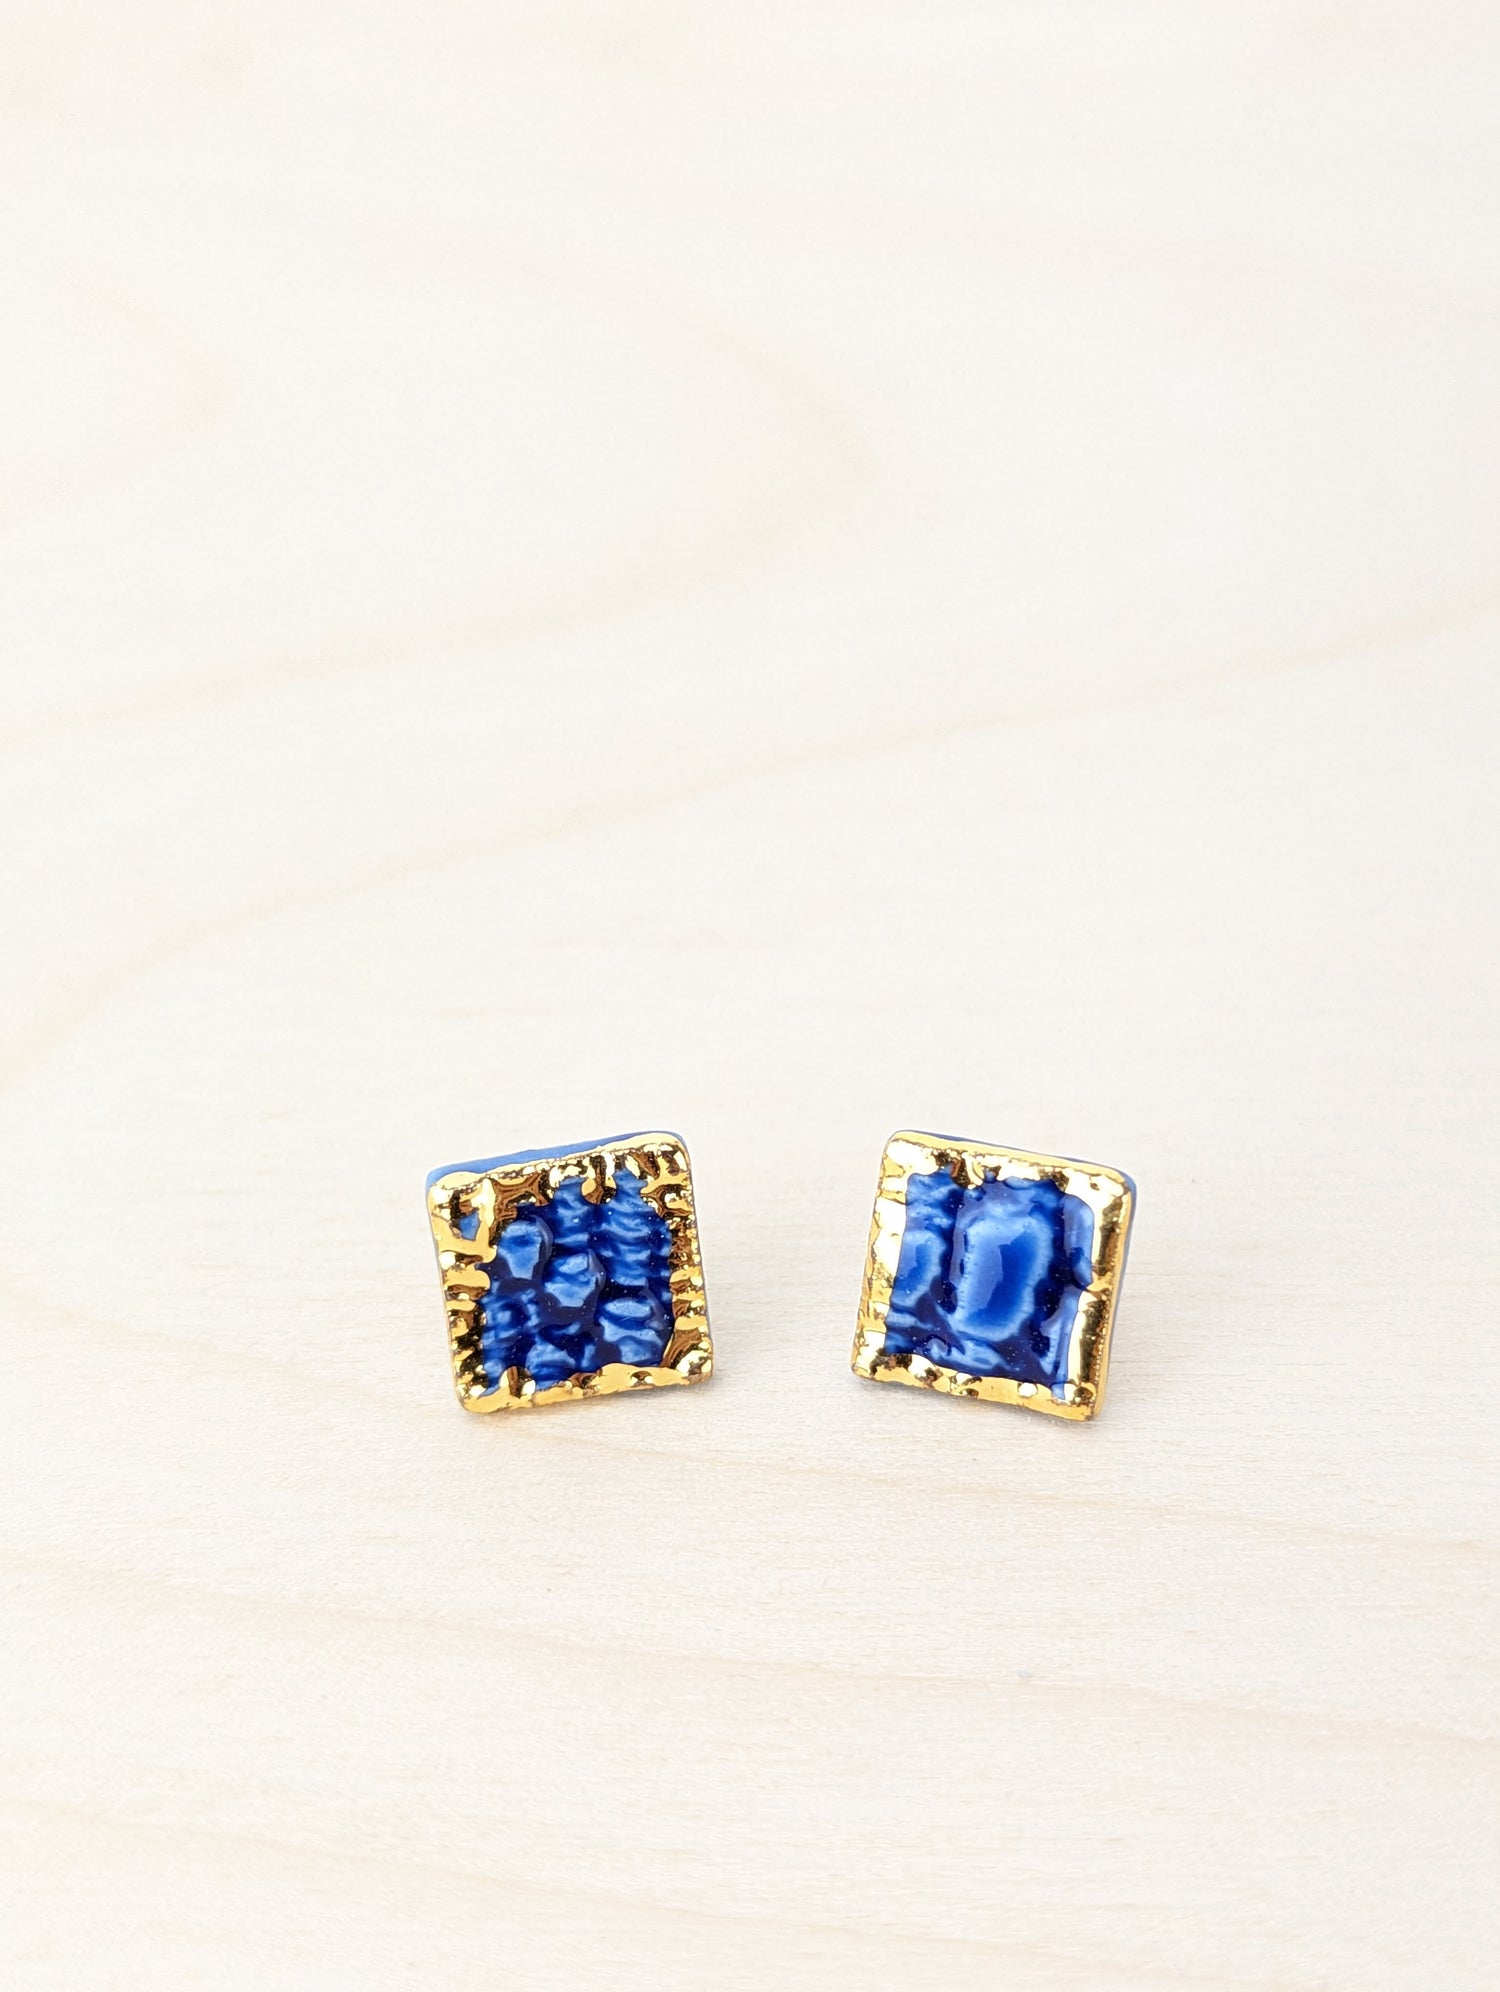 small square stud earrings in cobalt blue with a lace texture imprinted in the surface and a gold edge